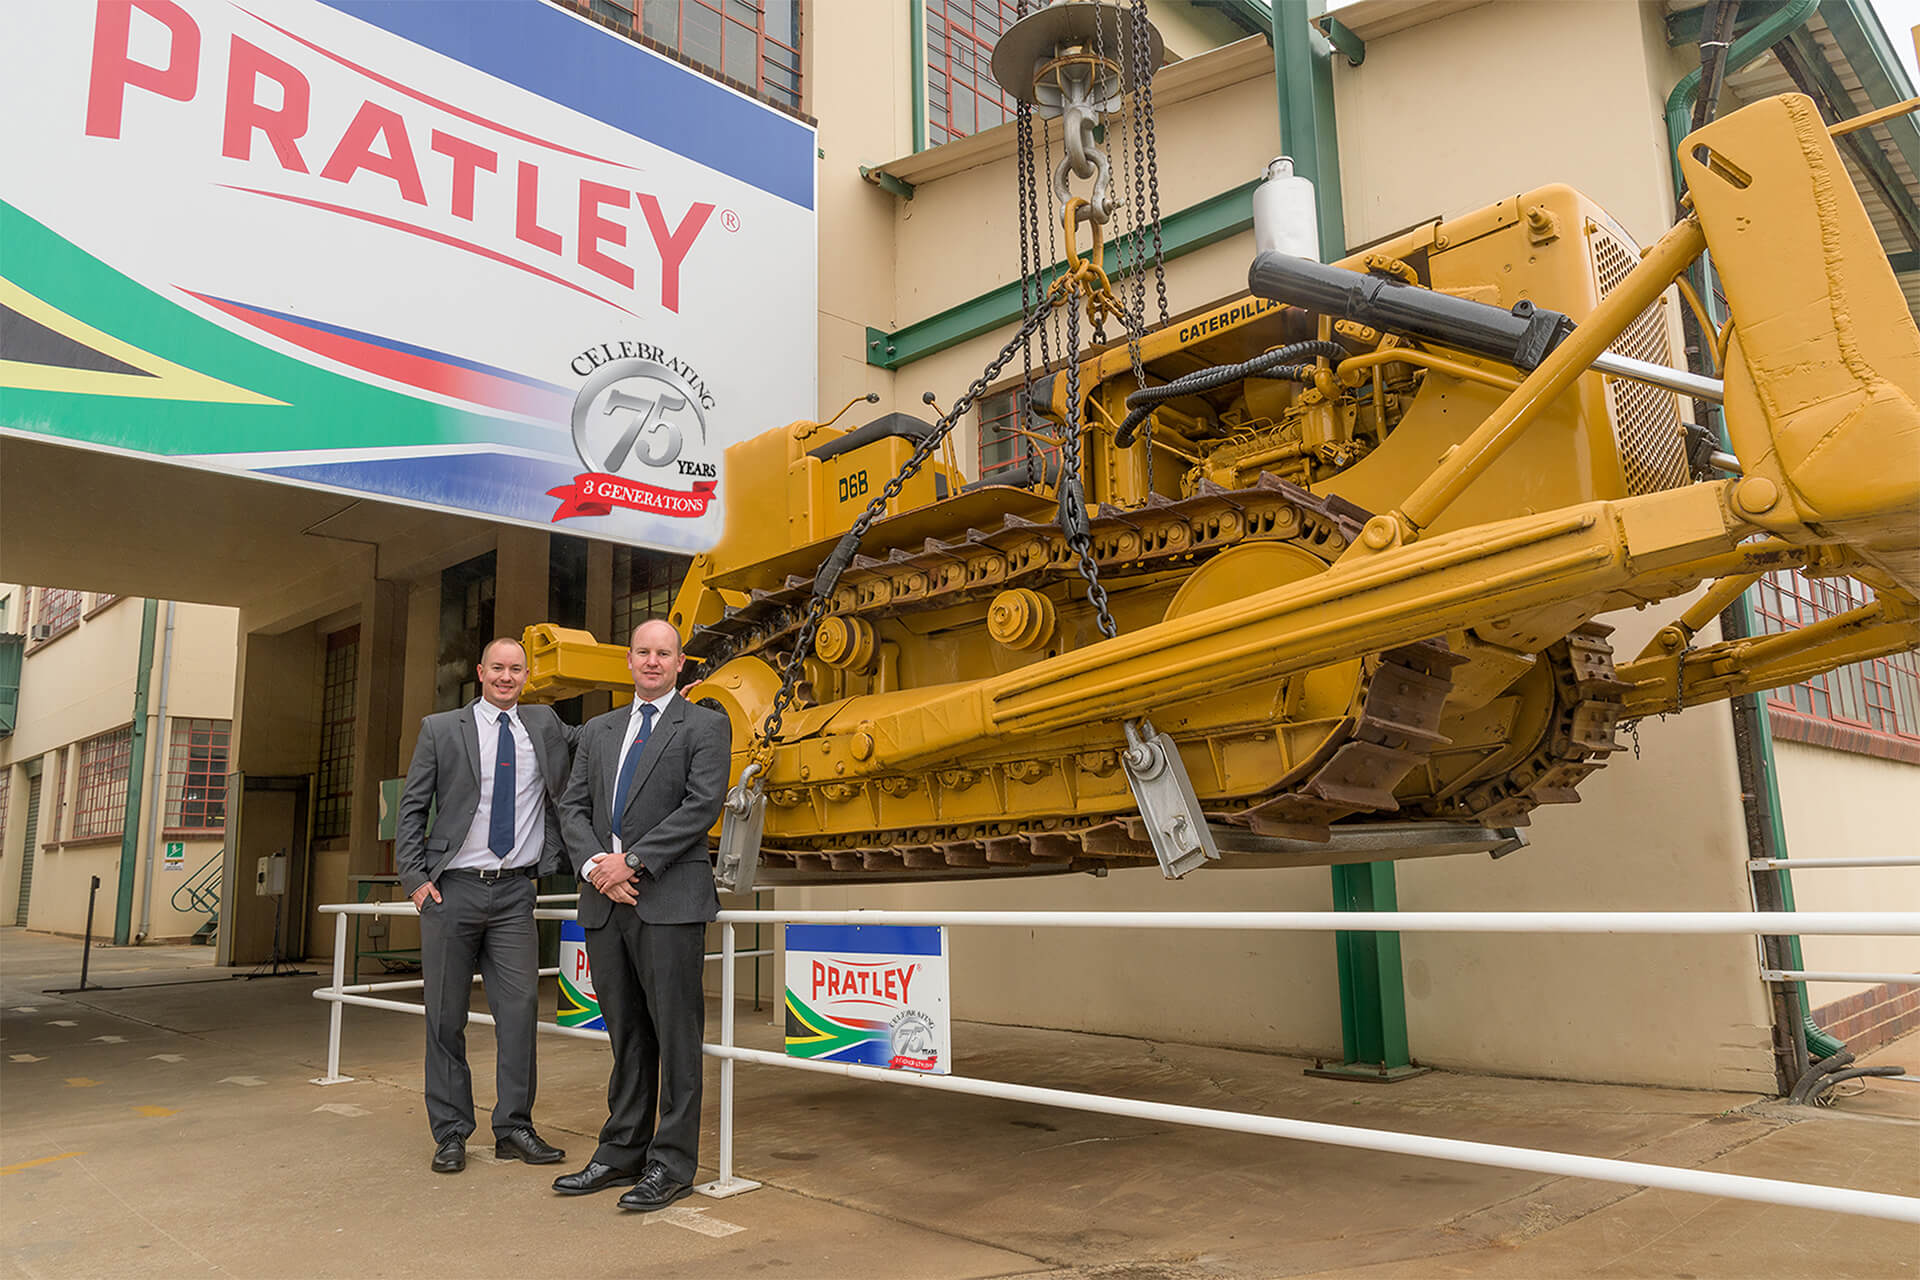 Recent_Posts_2023 marks 75 years of Pratley innovation